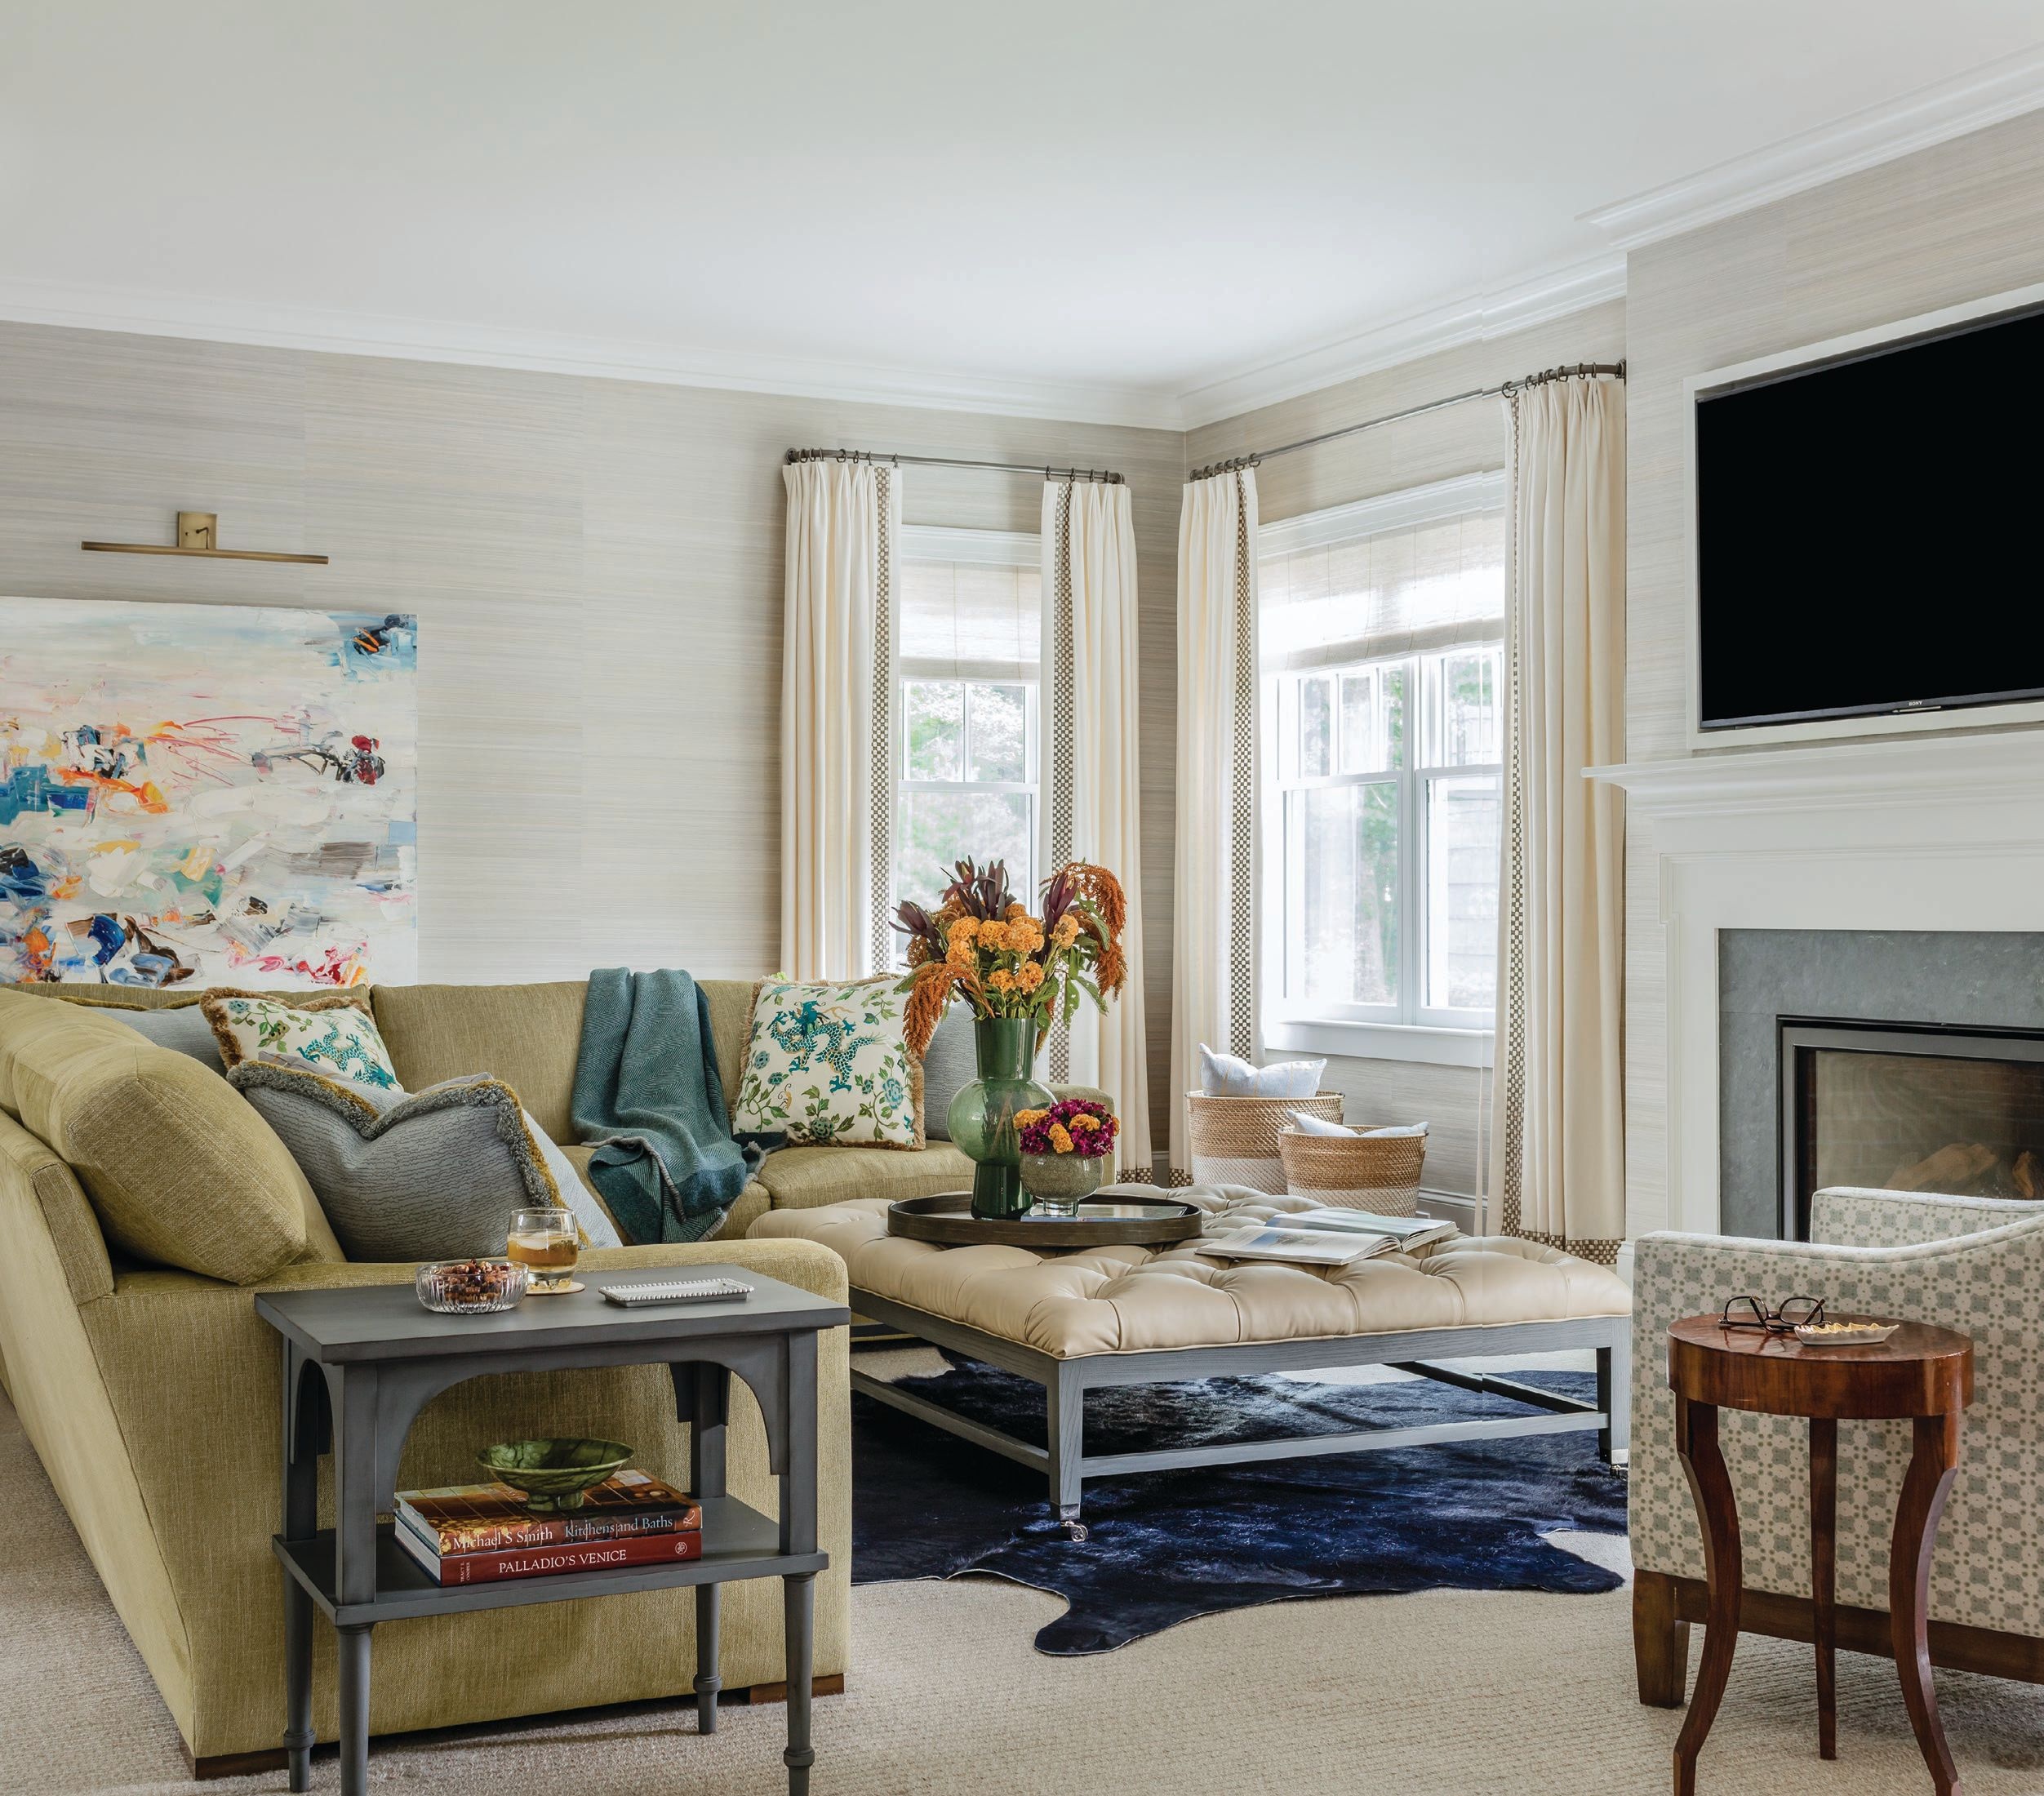 LeBlanc chose a neutral palette in the family room, including a large Verellen ottoman that can face the day-to-day foot traffic in the space. Photographed by Michael J. Lee